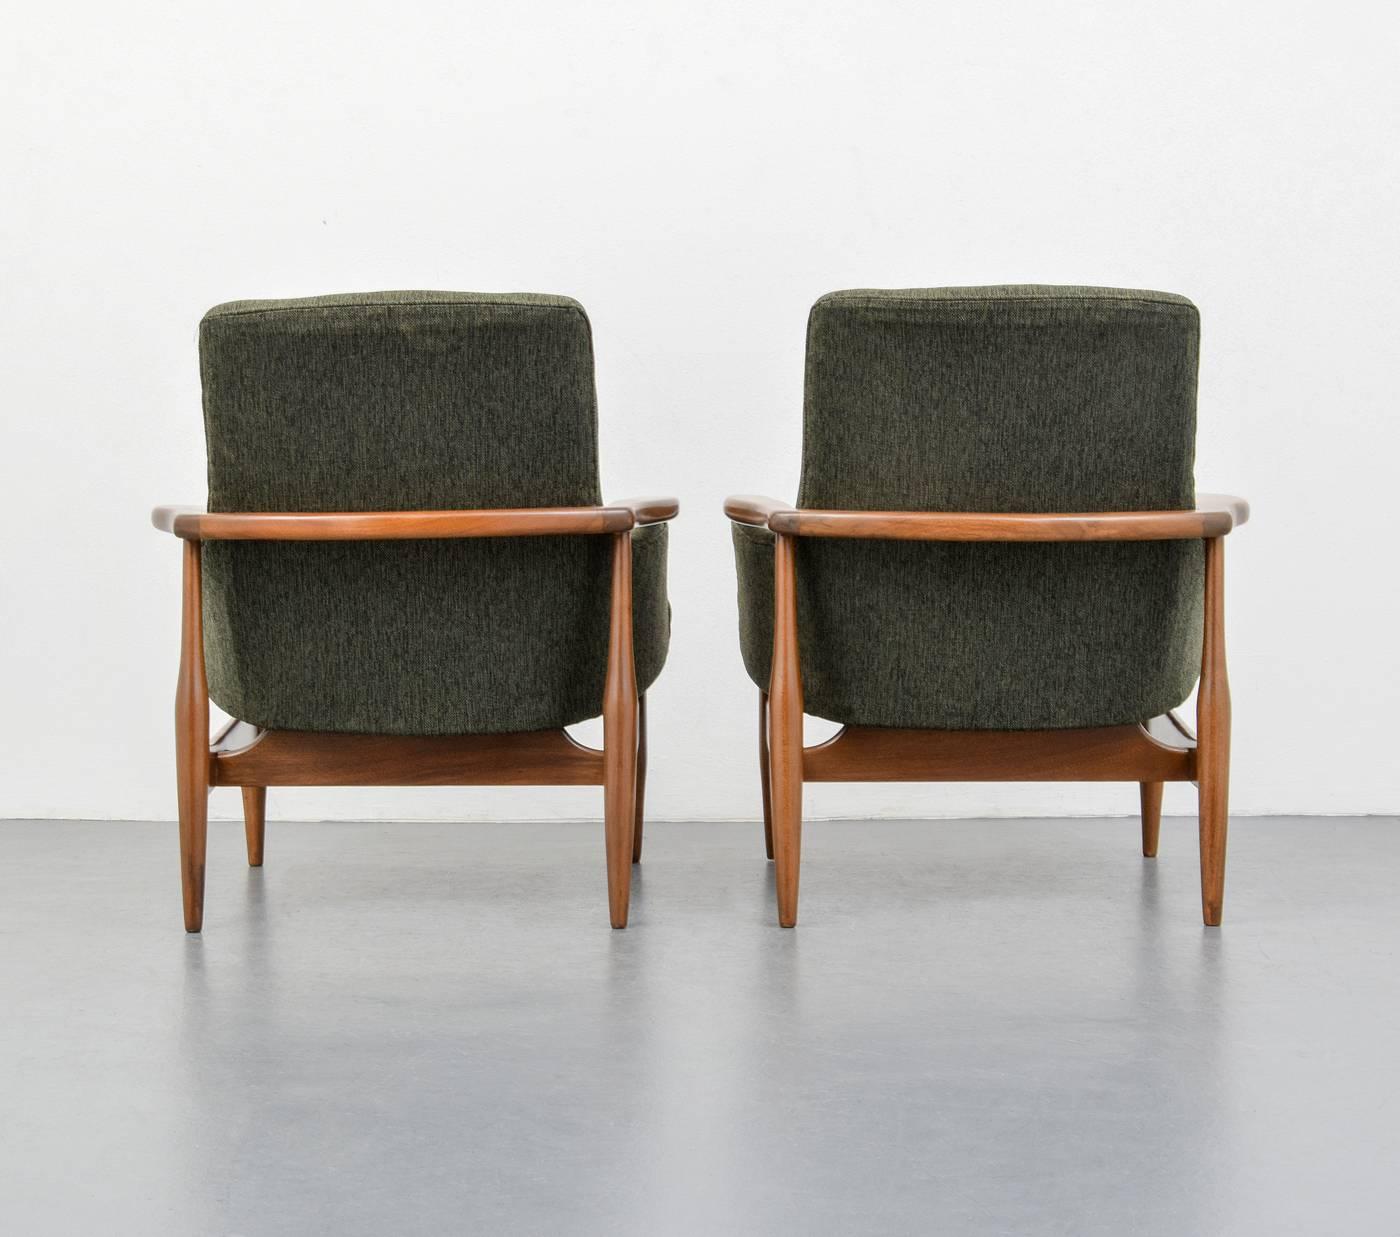 Danish Pair of Lounge Chairs in the Manner of Finn Juhl